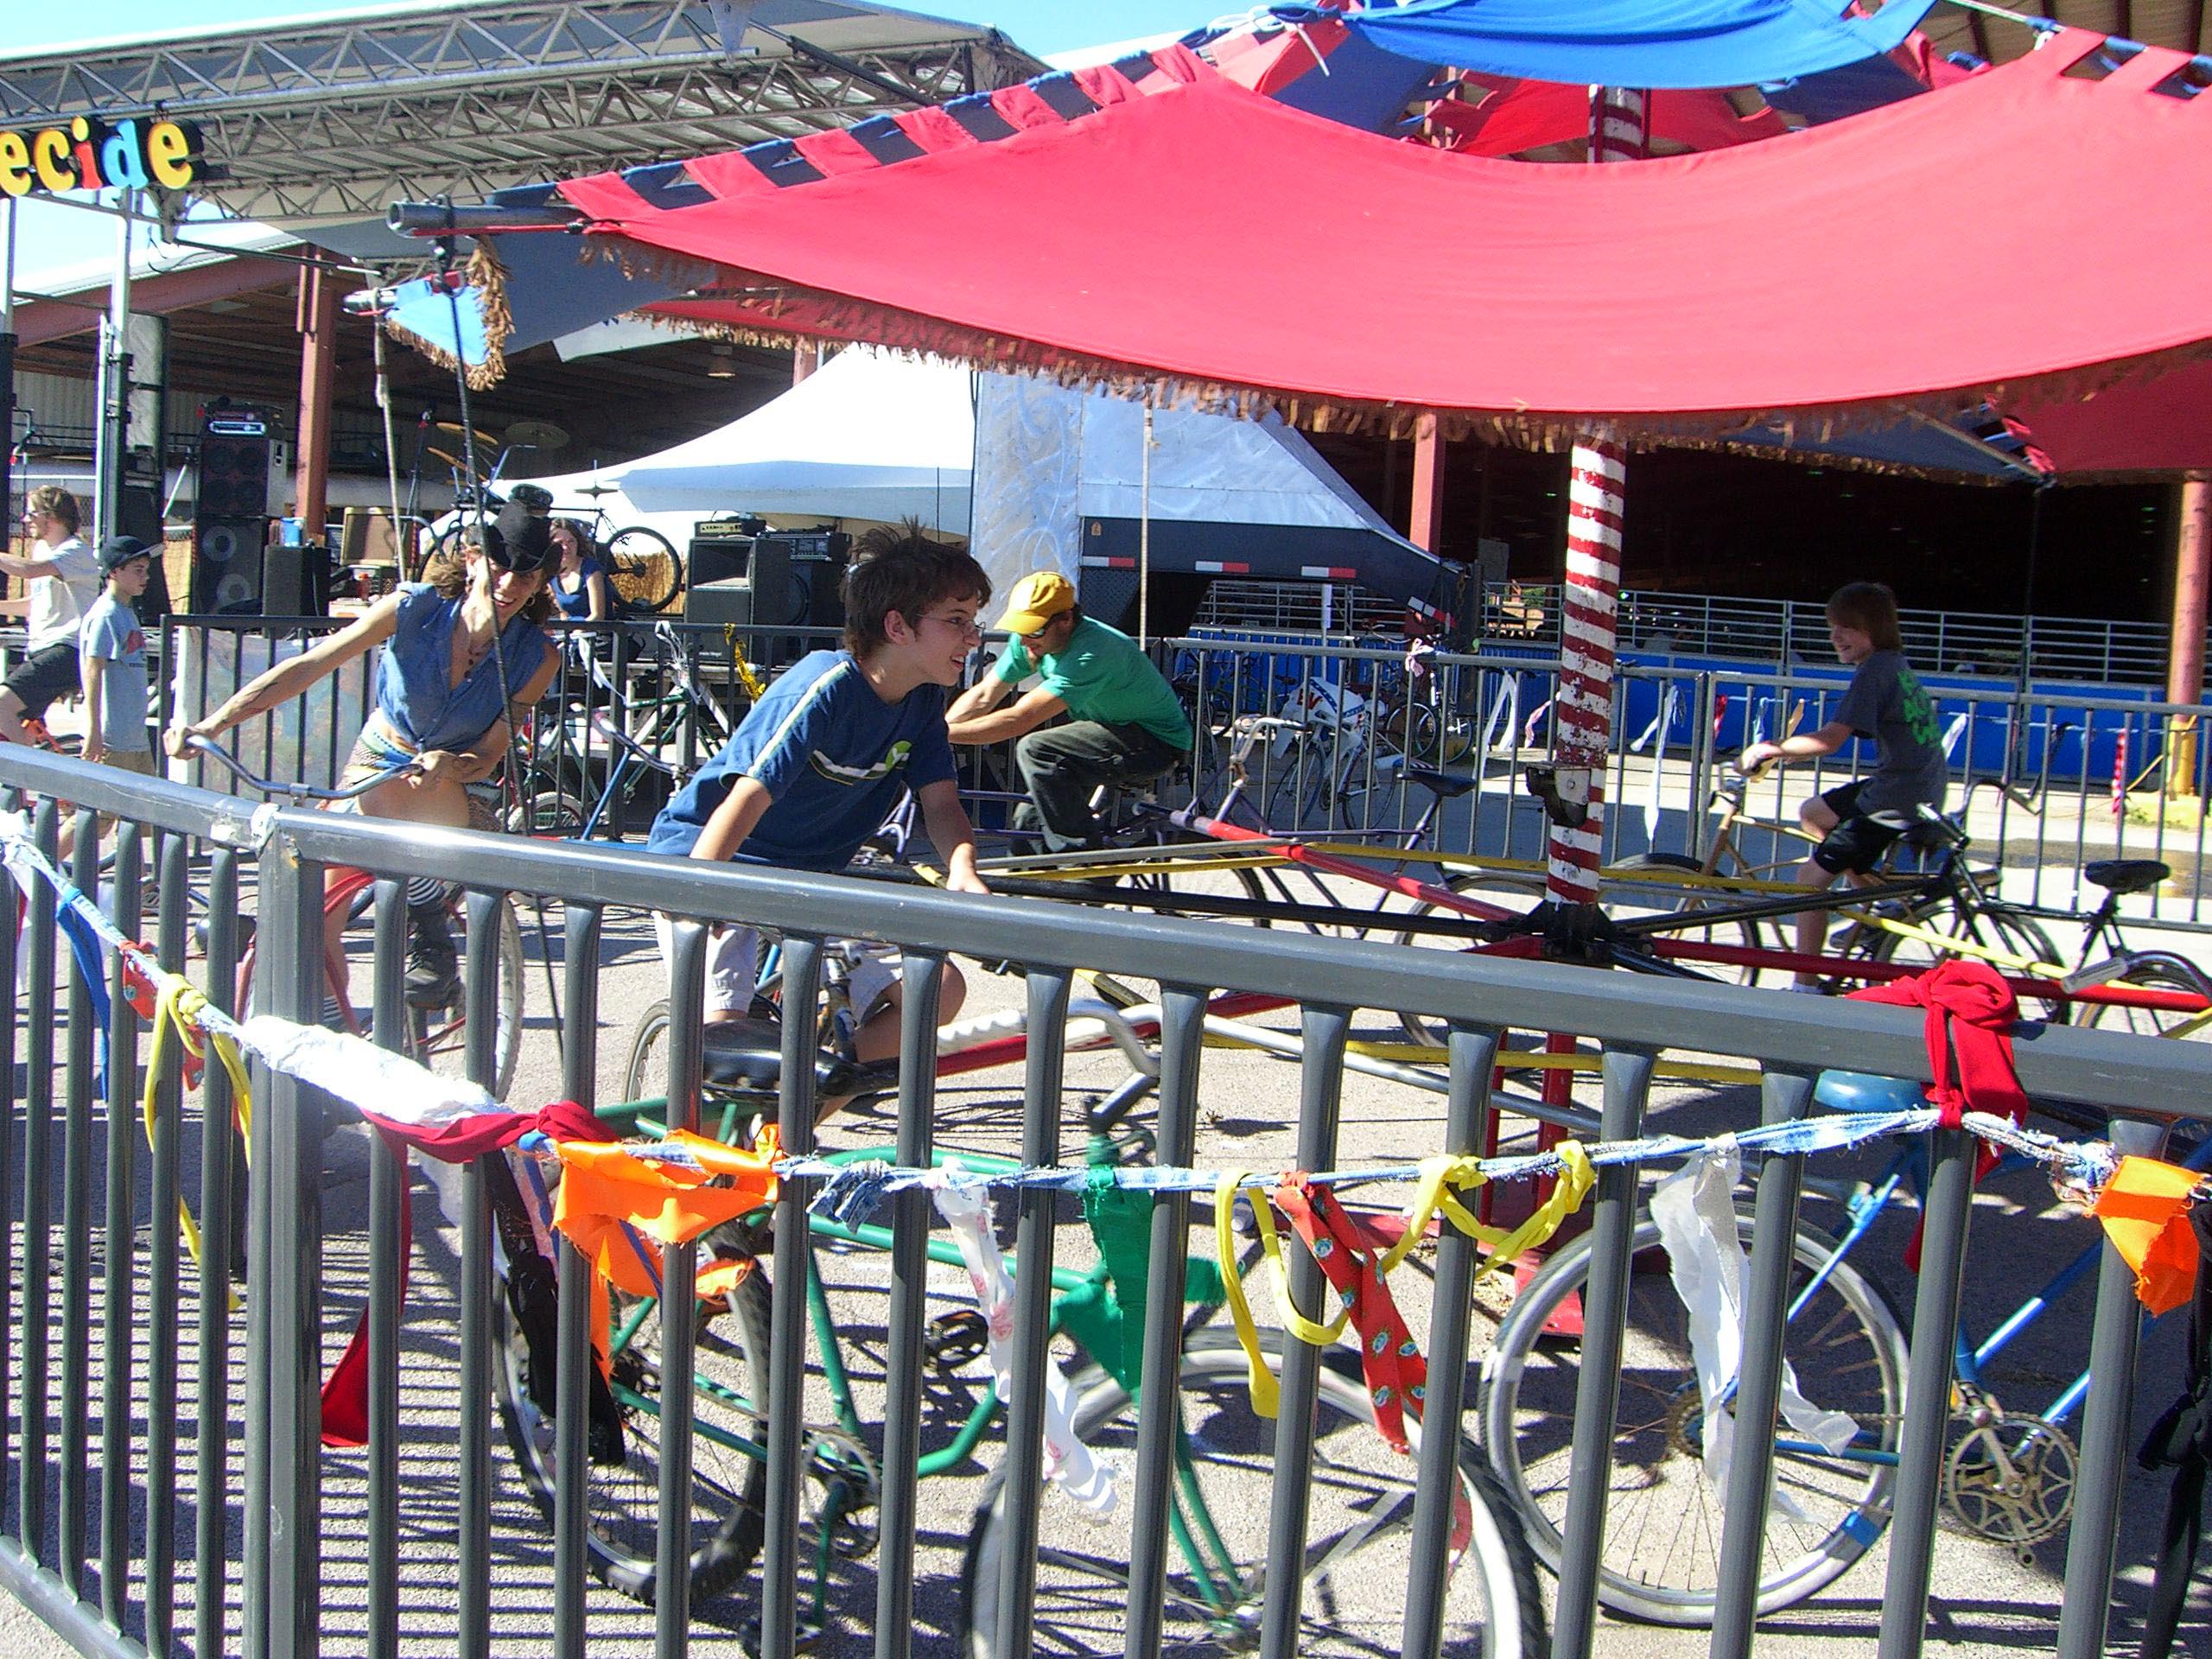 A bicycle merry-go-round at the Maker Faire 2007